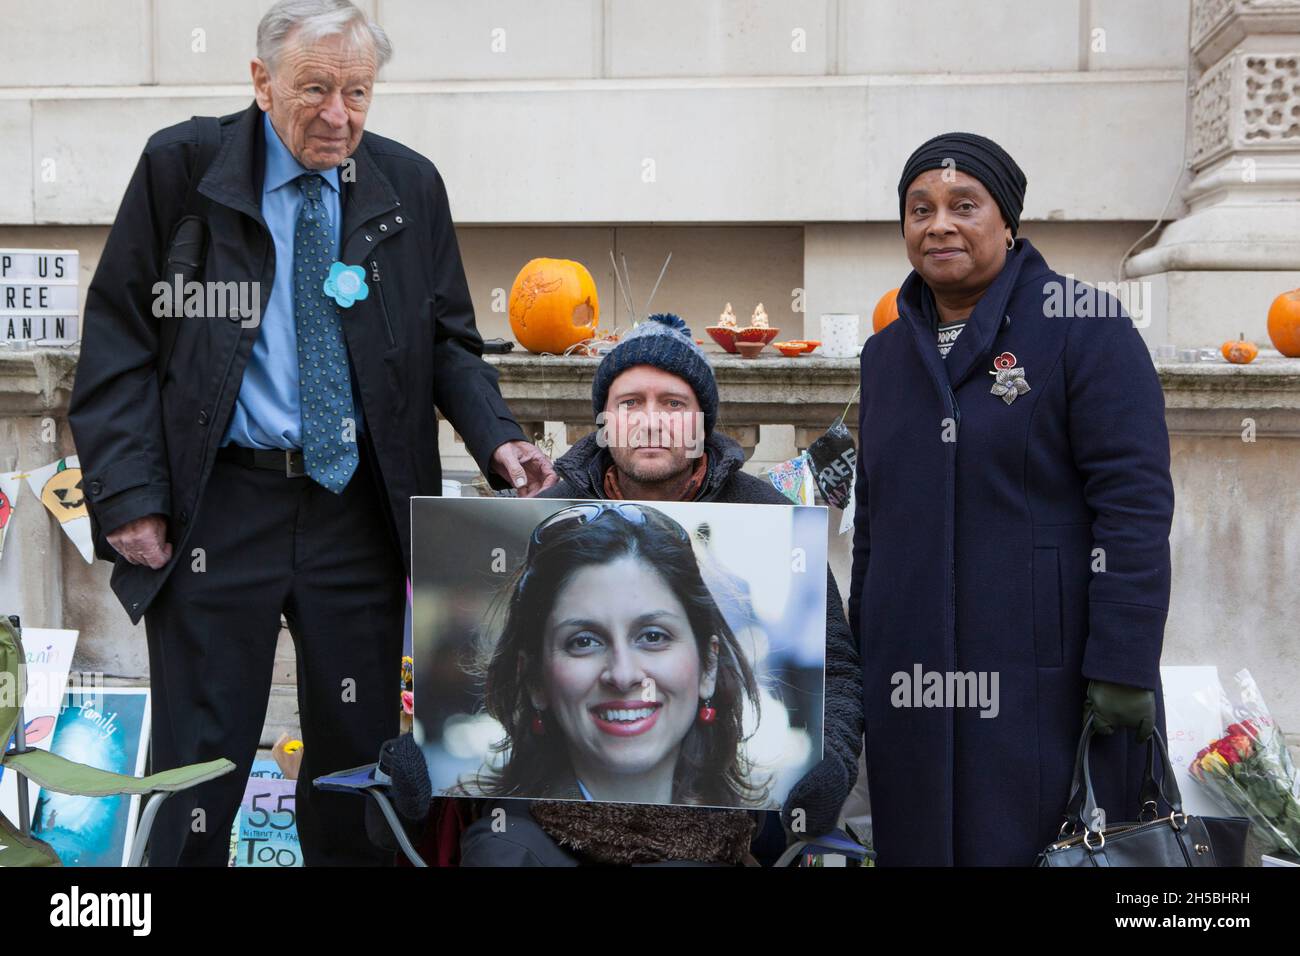 London, UK, 8 November 2021: On day 16 of Richard Ratcliffe's hunger strike to end government inaction over his wife Nazanin's incarceration in Iran, Lord Alf Dubs and Baroness Doreen Lawrence visited him to show support. He is showing remarkable good spirits as he continues camping in Whitehall outside the Foreign Office to campaign for them to take action to secure Nazanin Zaghari-Ratcliffe's release. Amnesty International are supporting his campaign and that for other dual nationality citizens imprisoned in Iran. Anna Watson/Alamy Live News Stock Photo